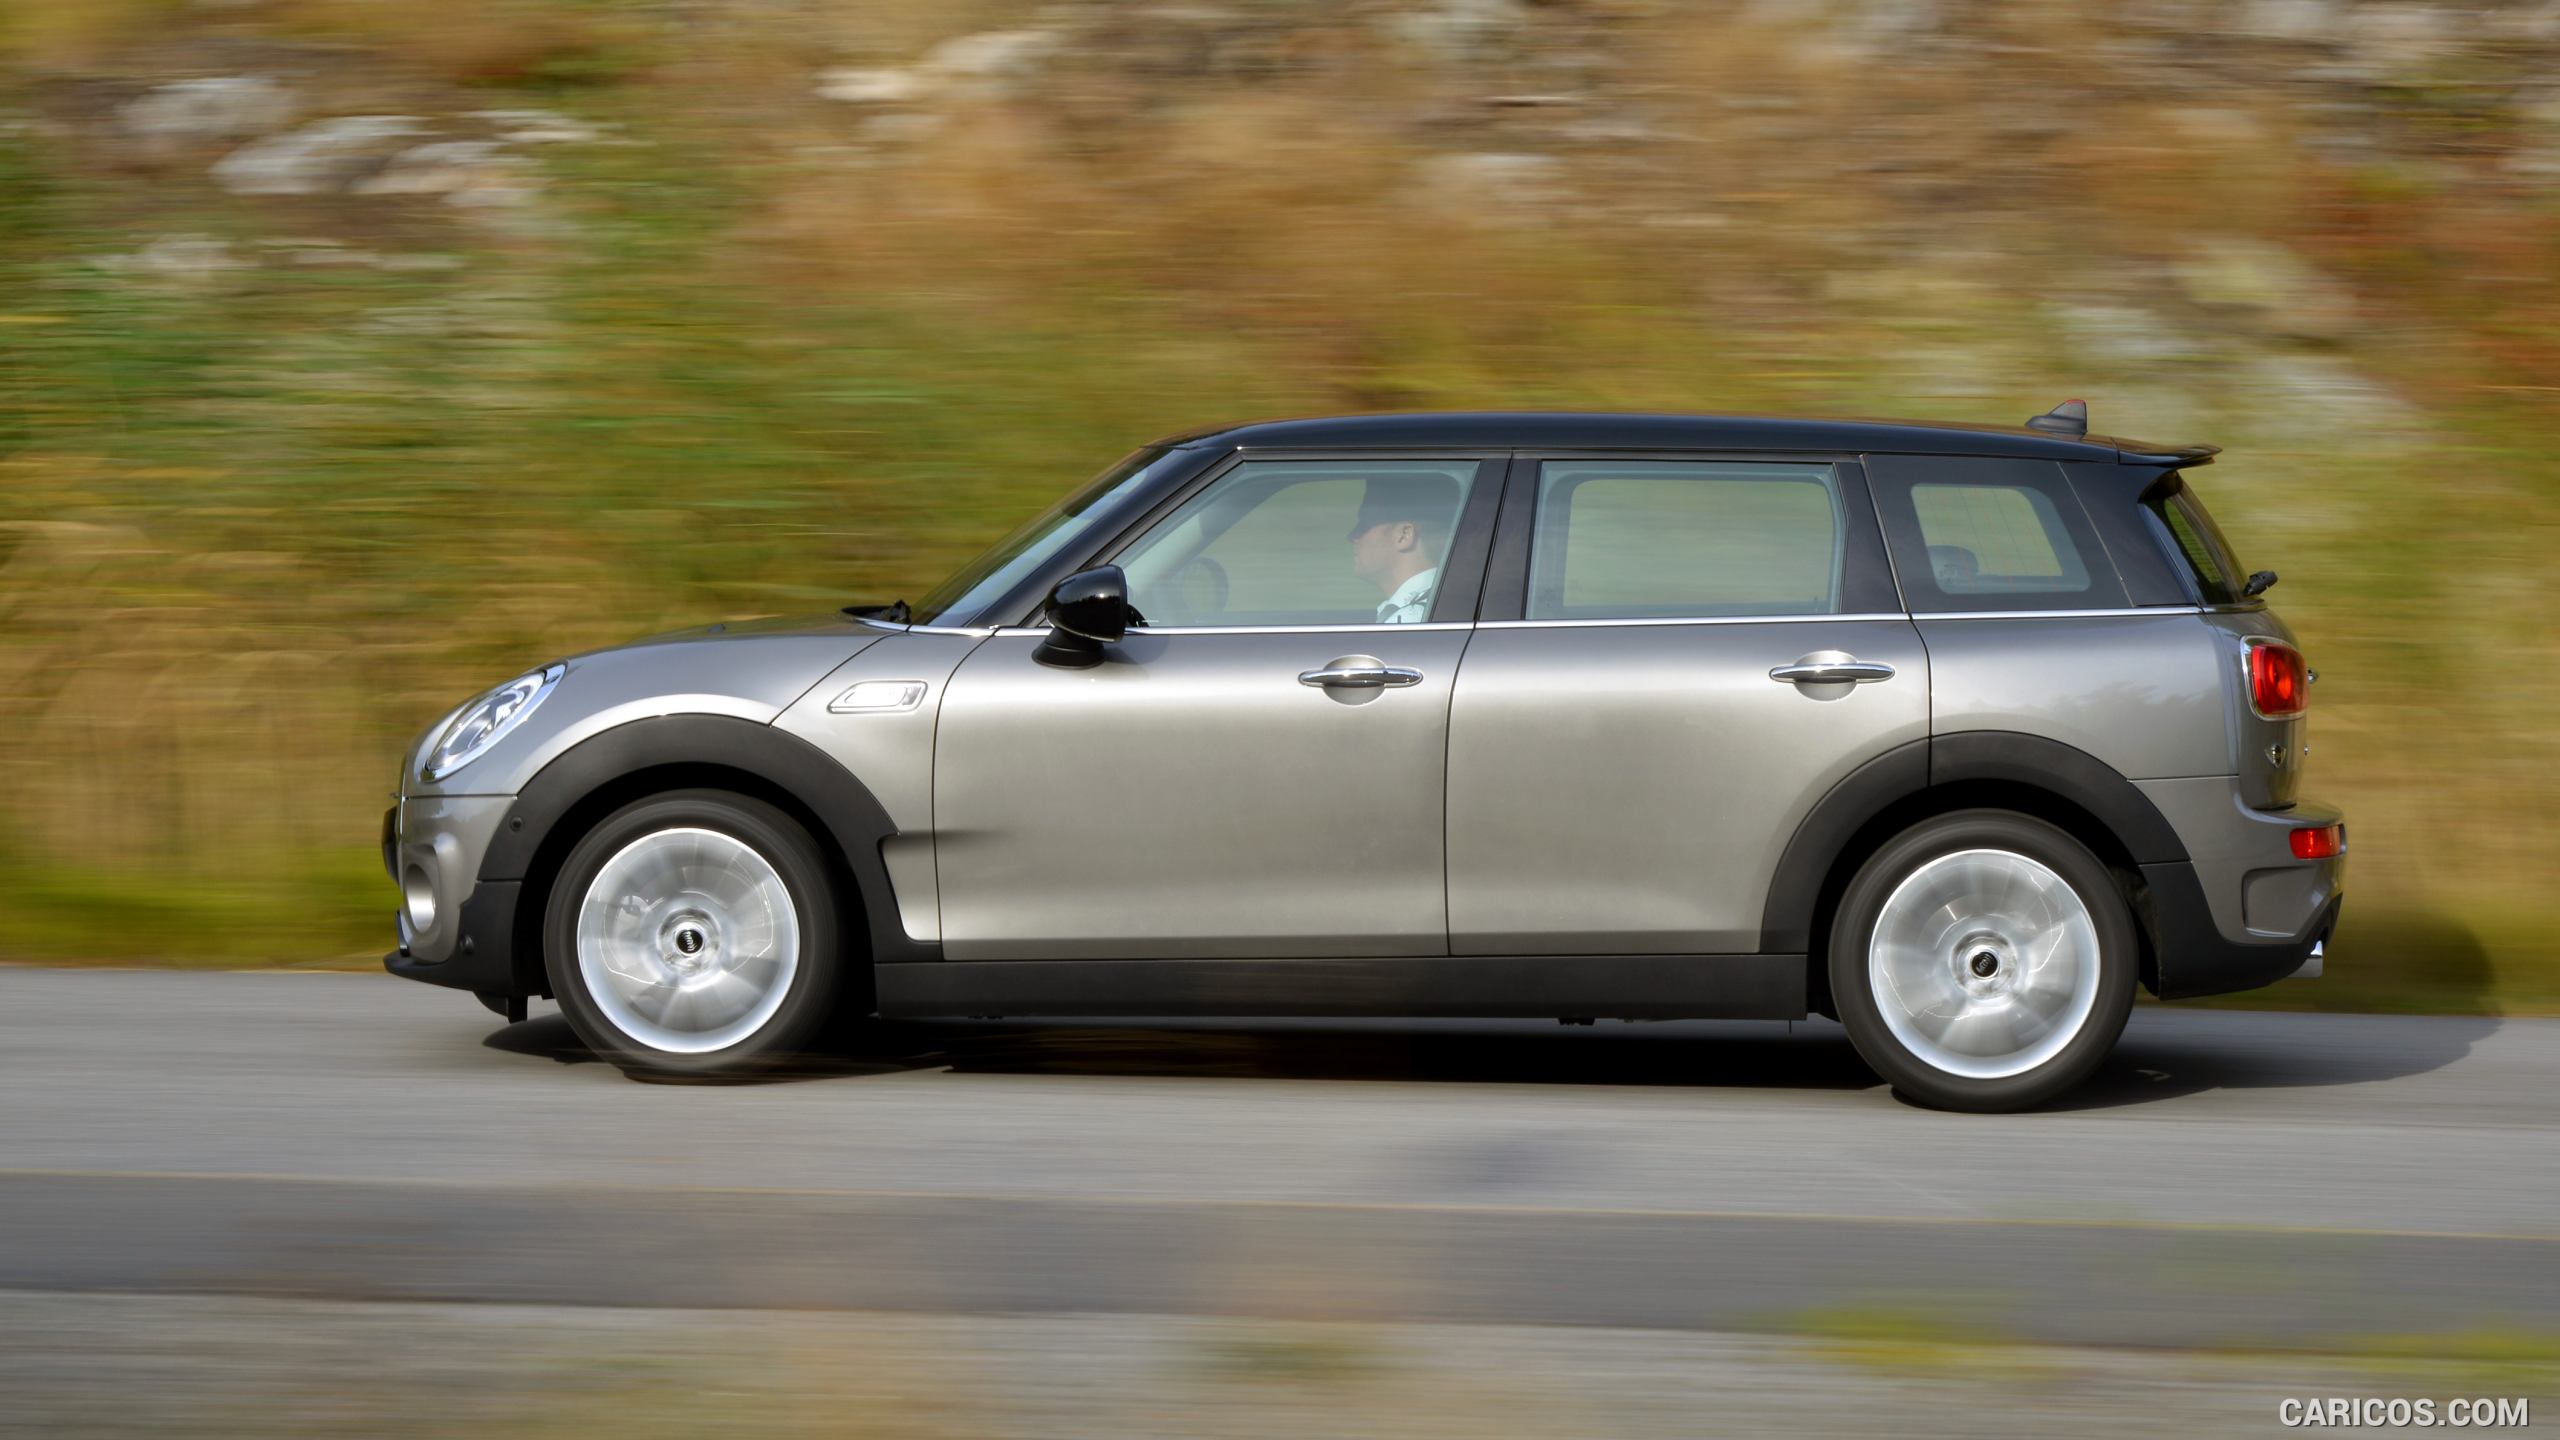 2016 MINI Cooper S Clubman in Metallic Melting Silver - Side, #146 of 380